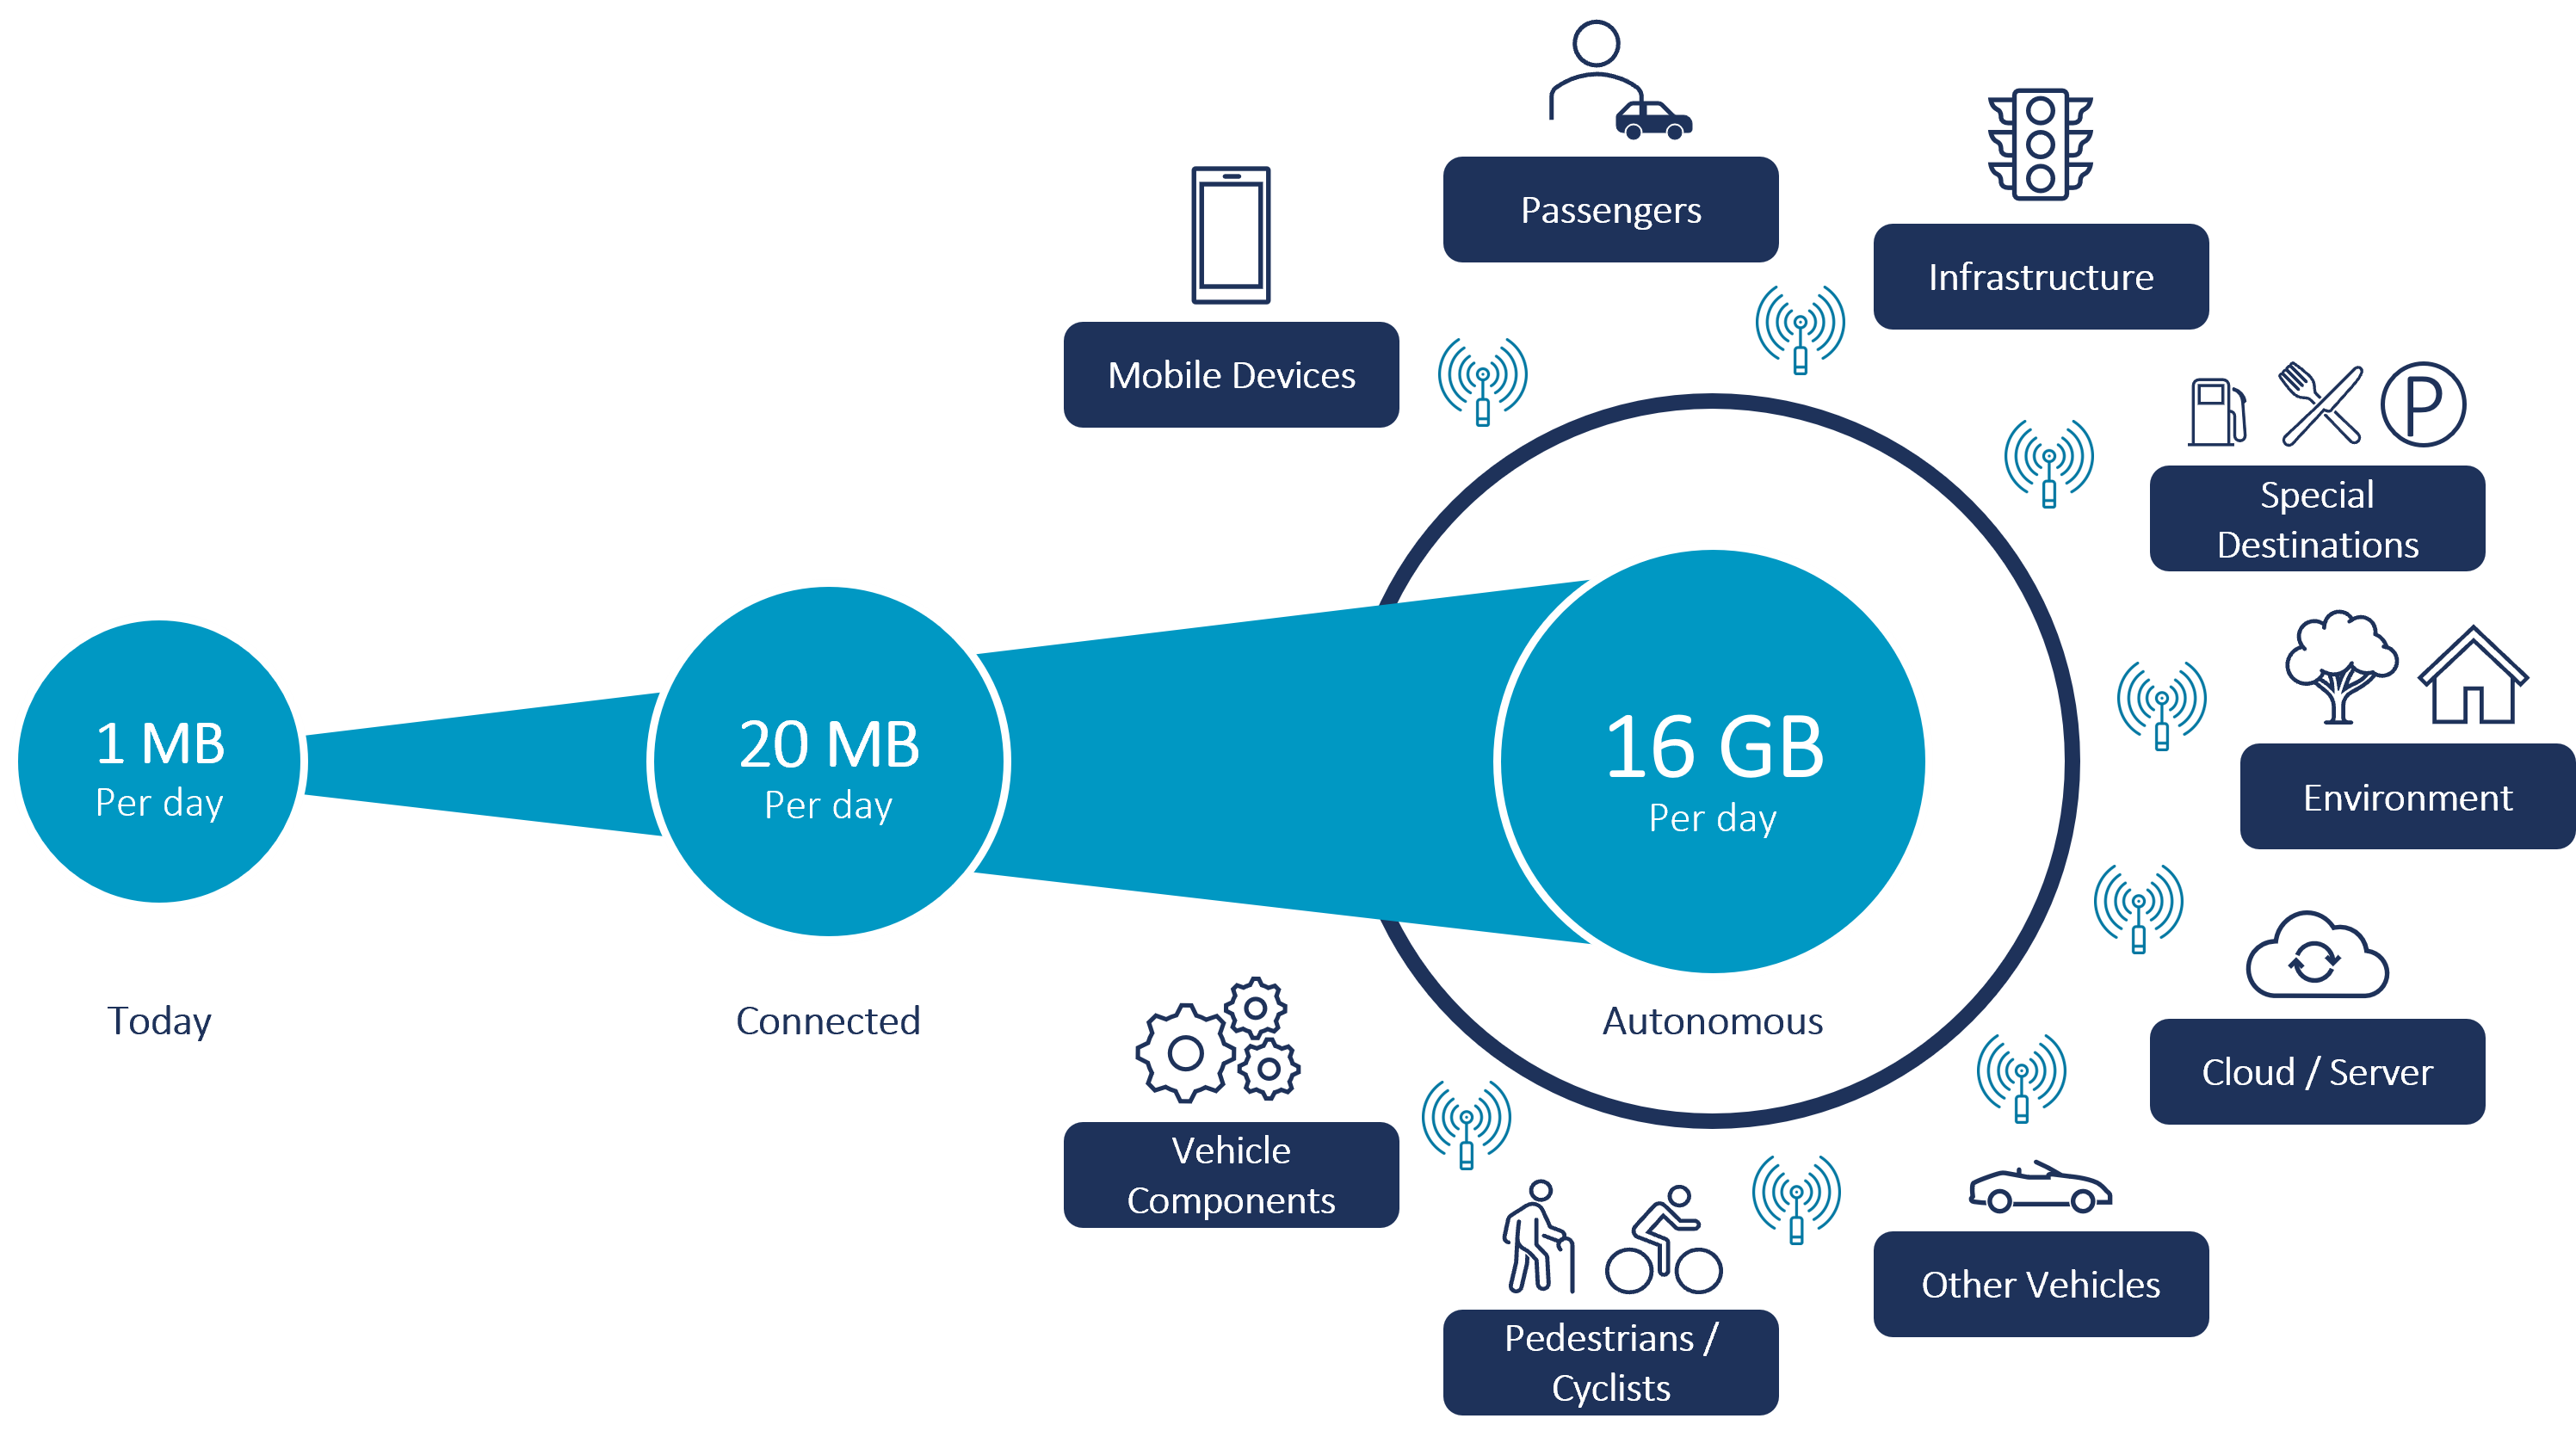 Figure 1: With the growing interconnectivity and automation of mobility, the amount of data generated by the different data sources in the transport ecosystem increases exponentially